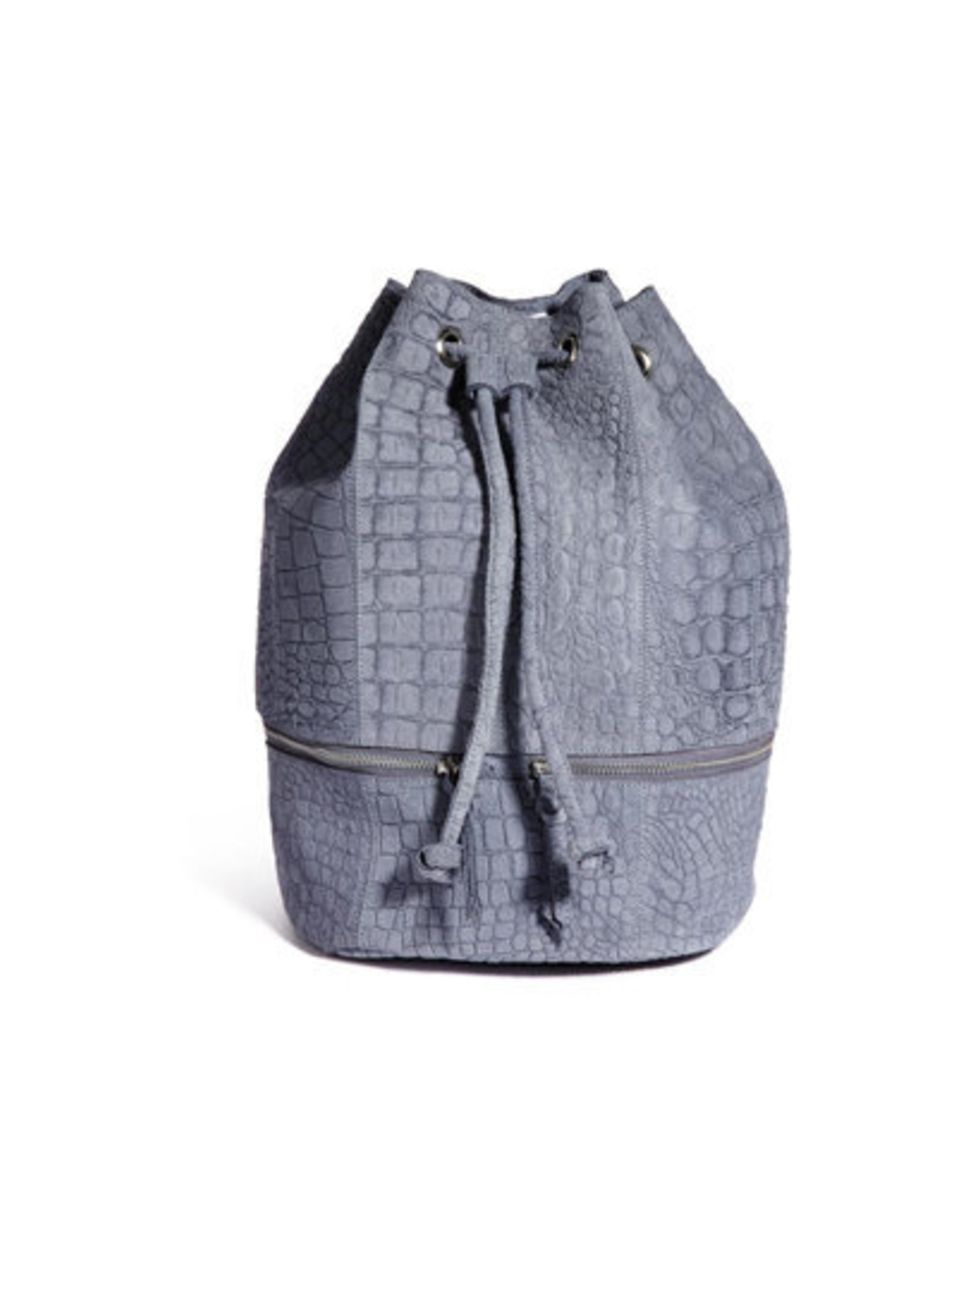 <p><a href="http://www.asos.com/ASOS/ASOS-Leather-Backpack-In-Embossed-Croc/Prod/pgeproduct.aspx?iid=3583175&amp;WT.ac=rec_viewed">Asos</a> leather backpack, £60</p>